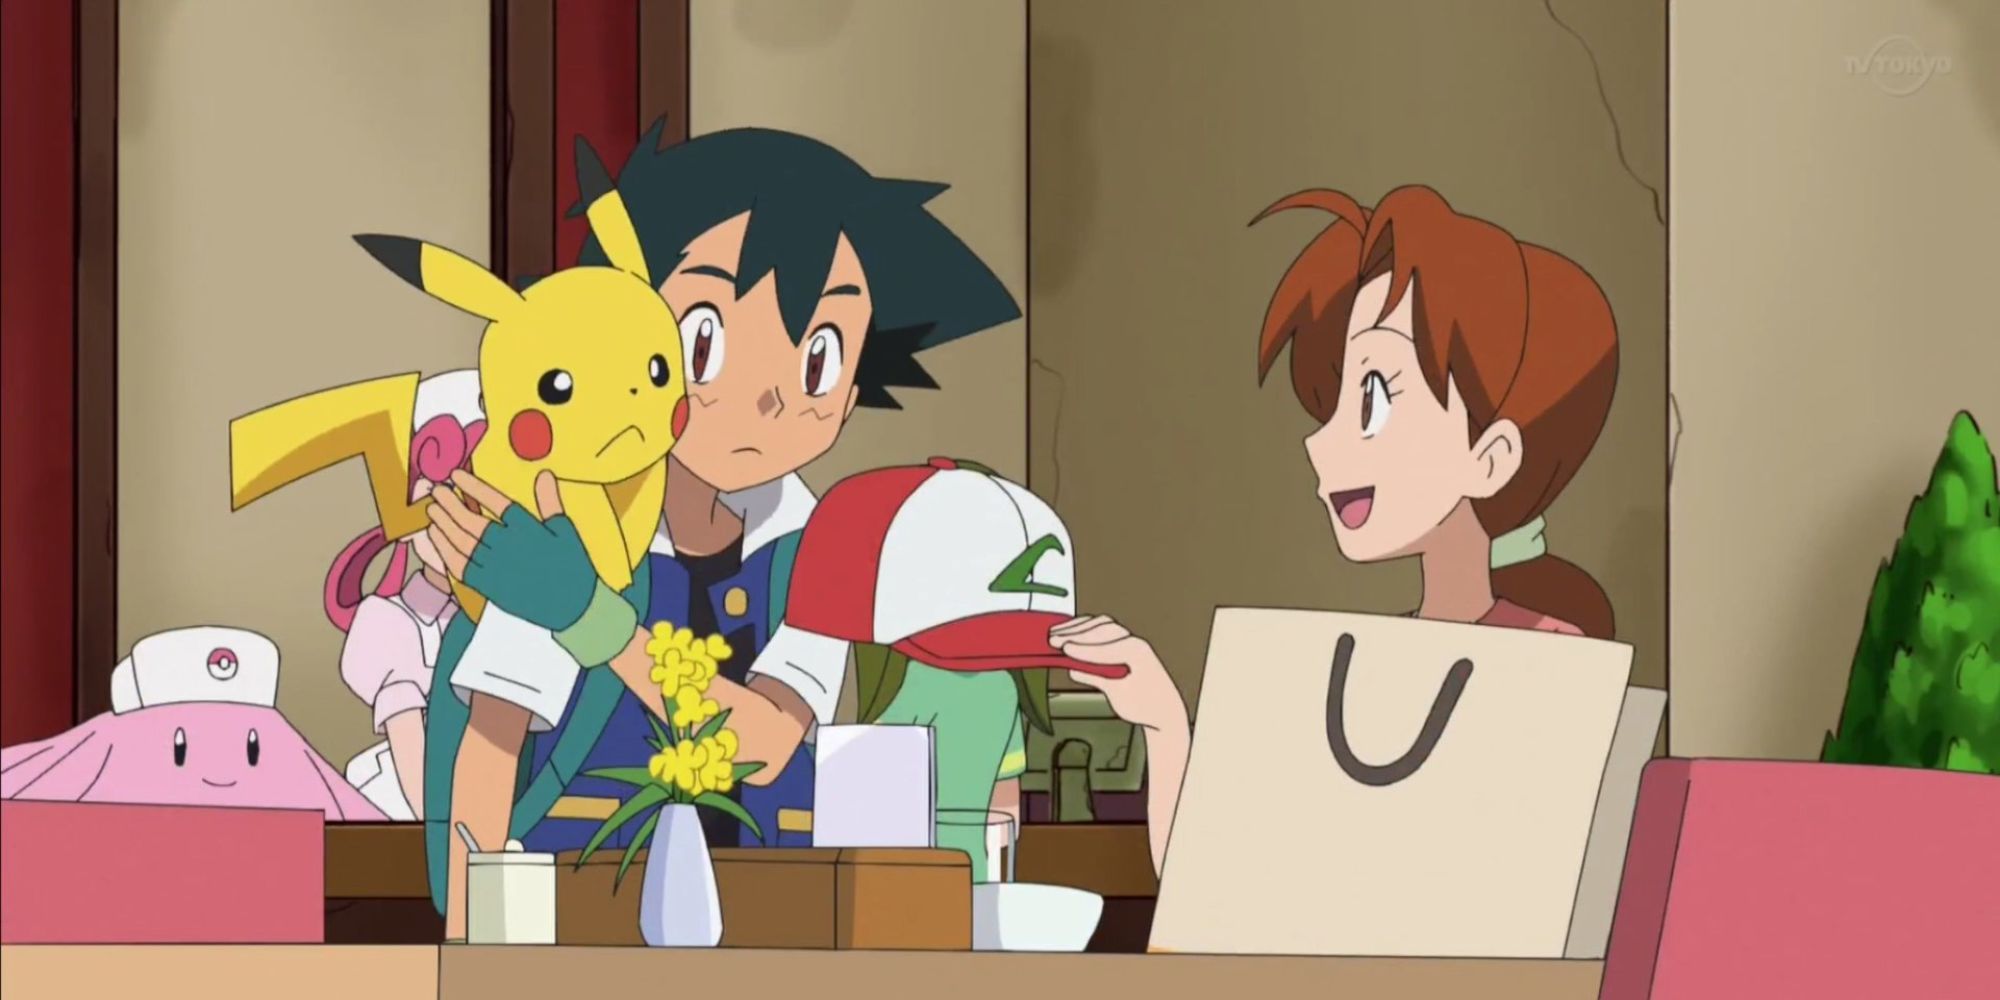 Ash being given a gift from his dad in the Pokemon anime.